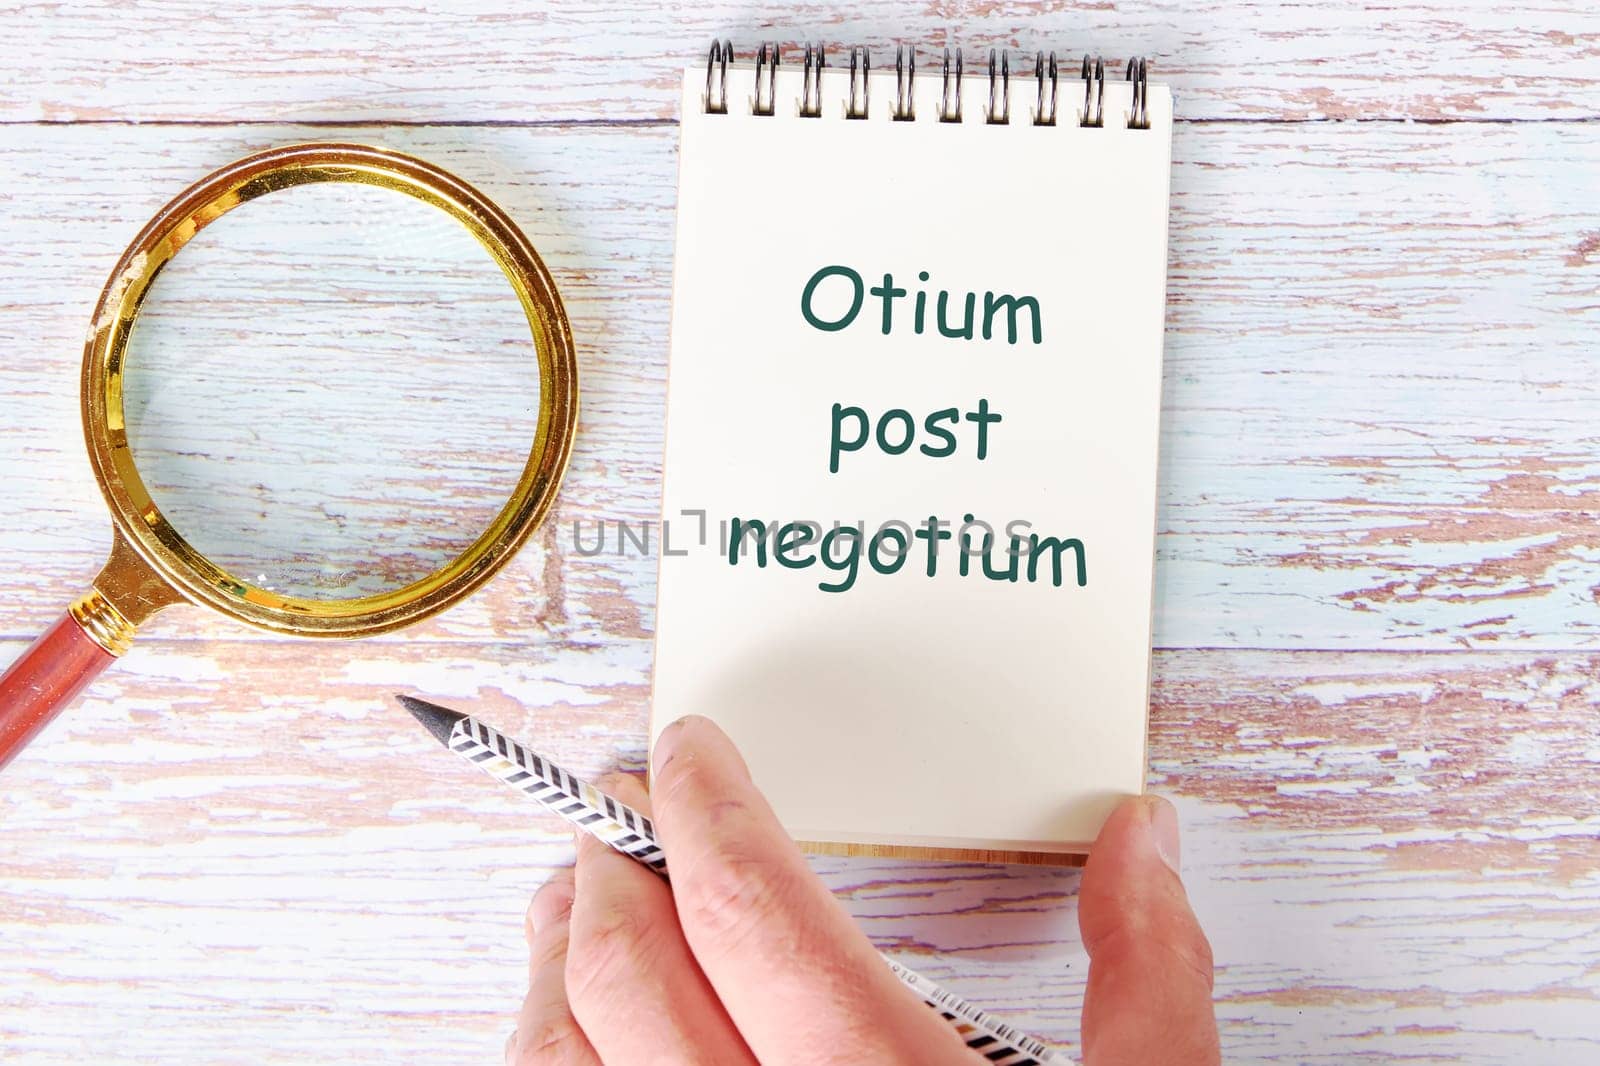 Otium post negotium It is translated from Latin as, Rest after the case It is written in a clean open notebook